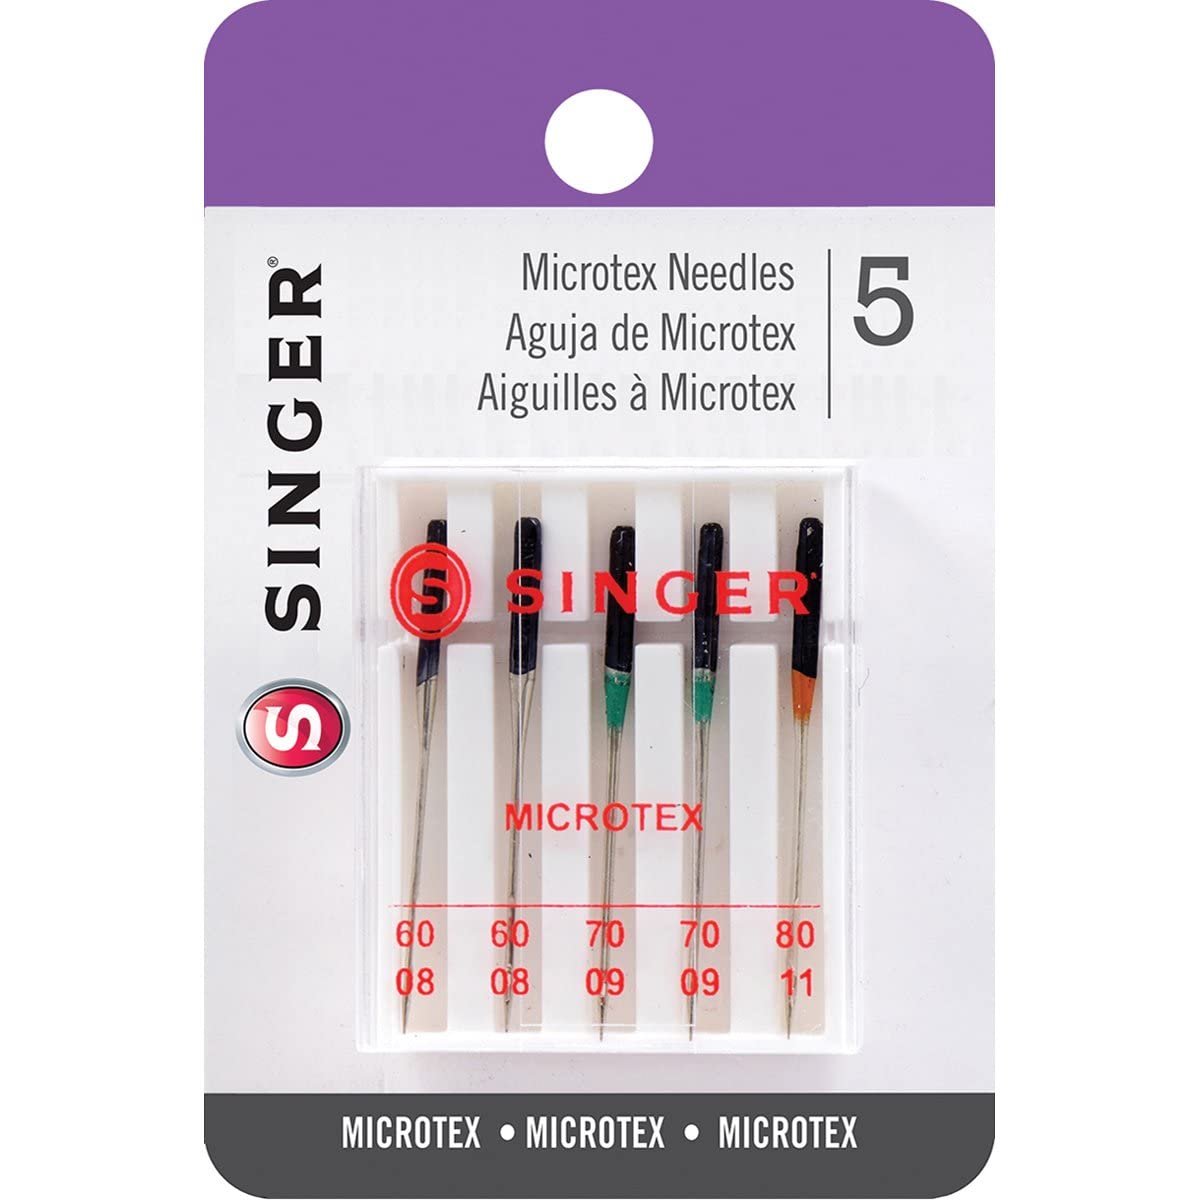 SINGER 04708 Assorted Universal Microtex Sewing Machine Needles, Sizes 60/8, 70/09, 80/11, 5-Count (Packaging May Vary)